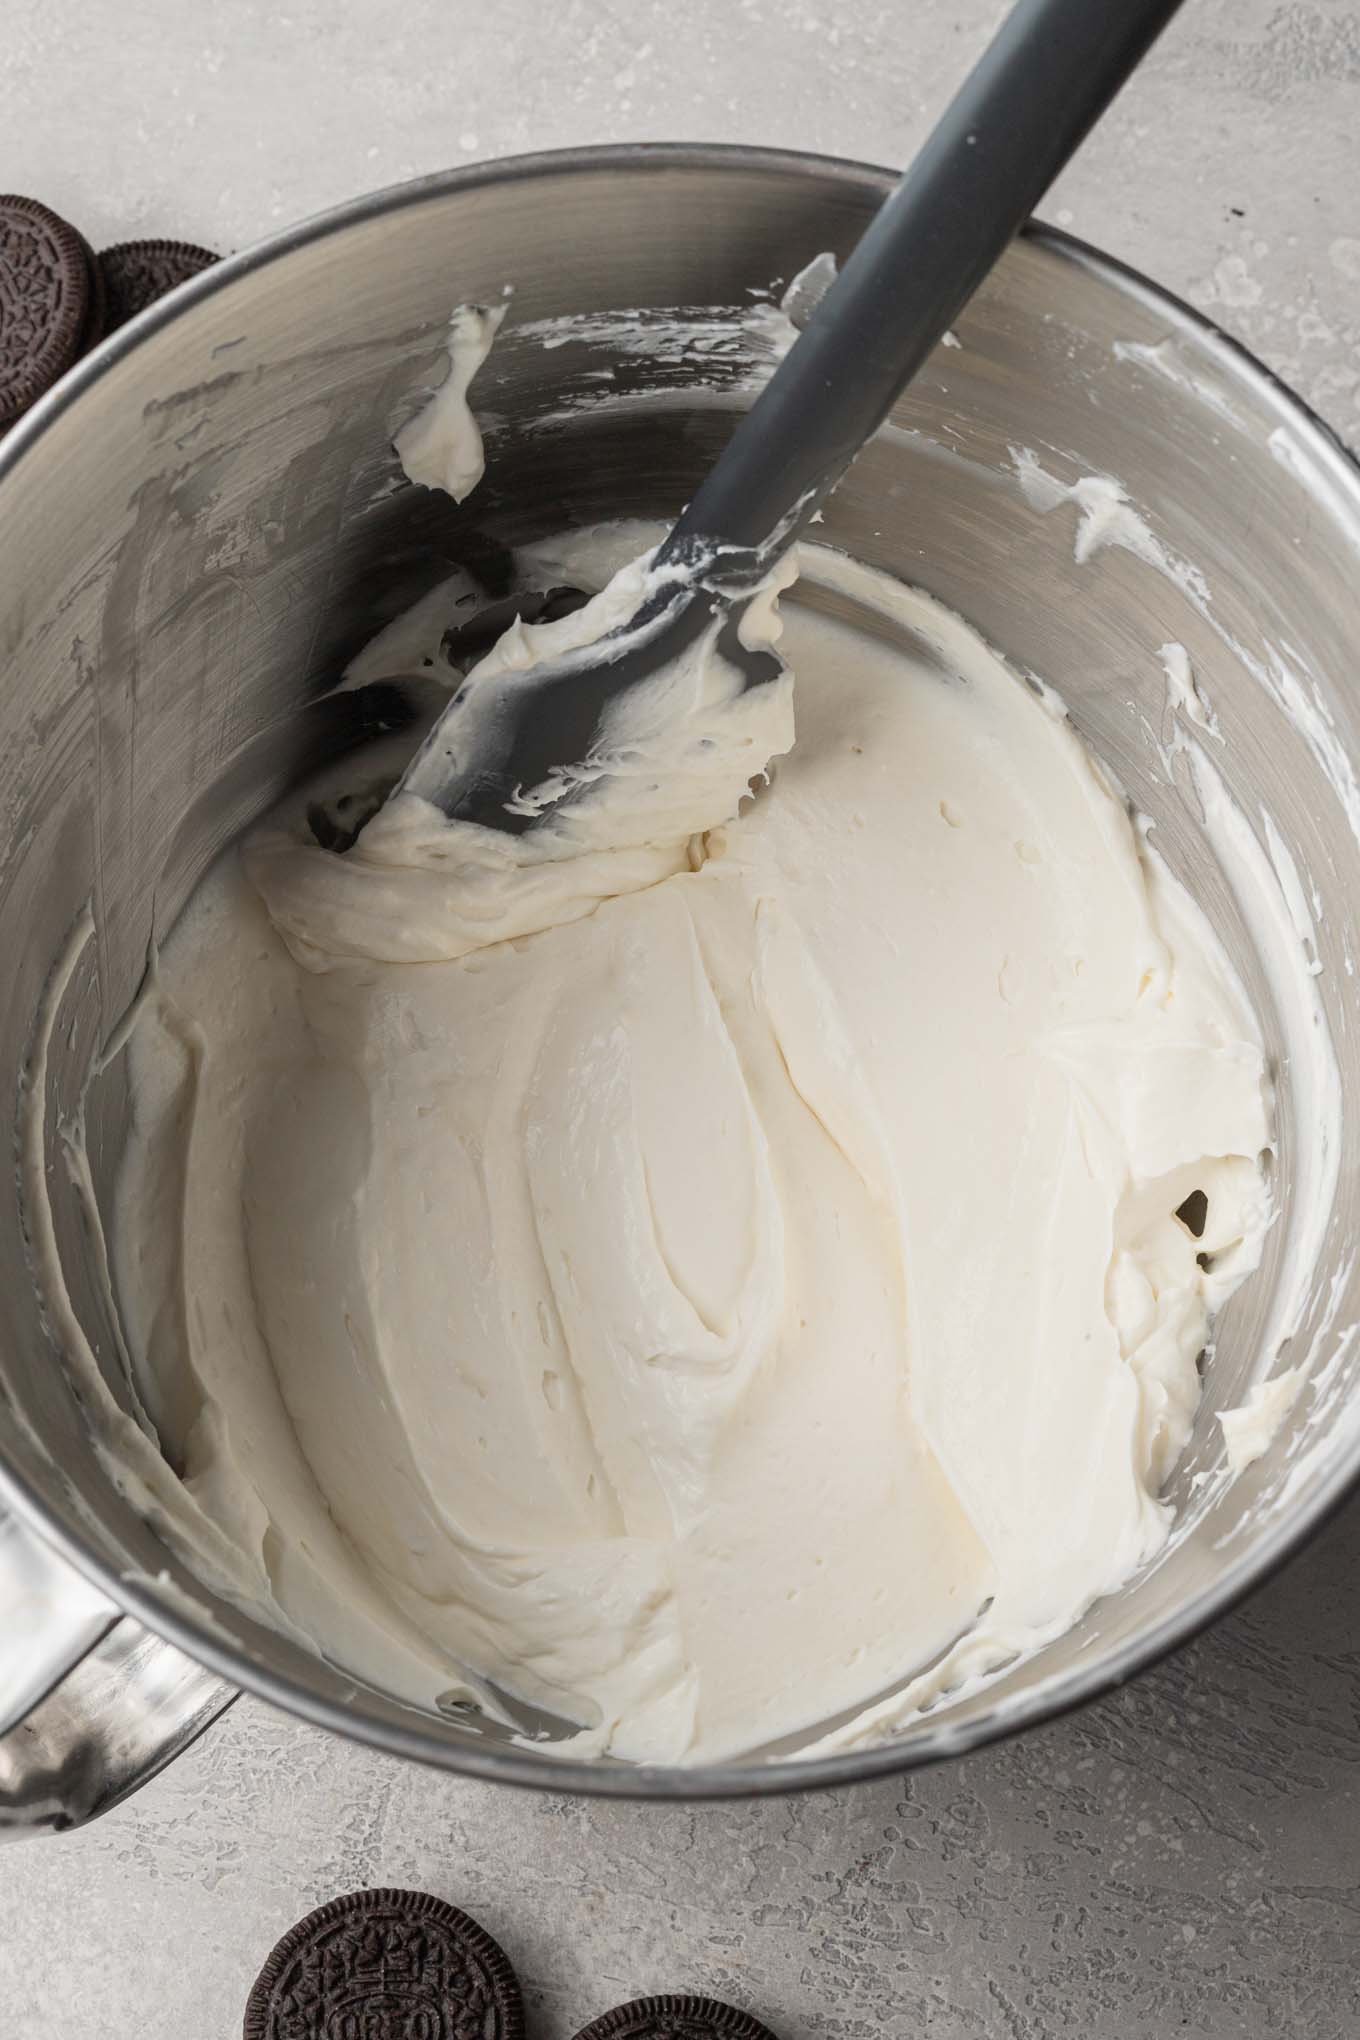 An overhead view of whipped cream being folded into the cream cheese mixture.